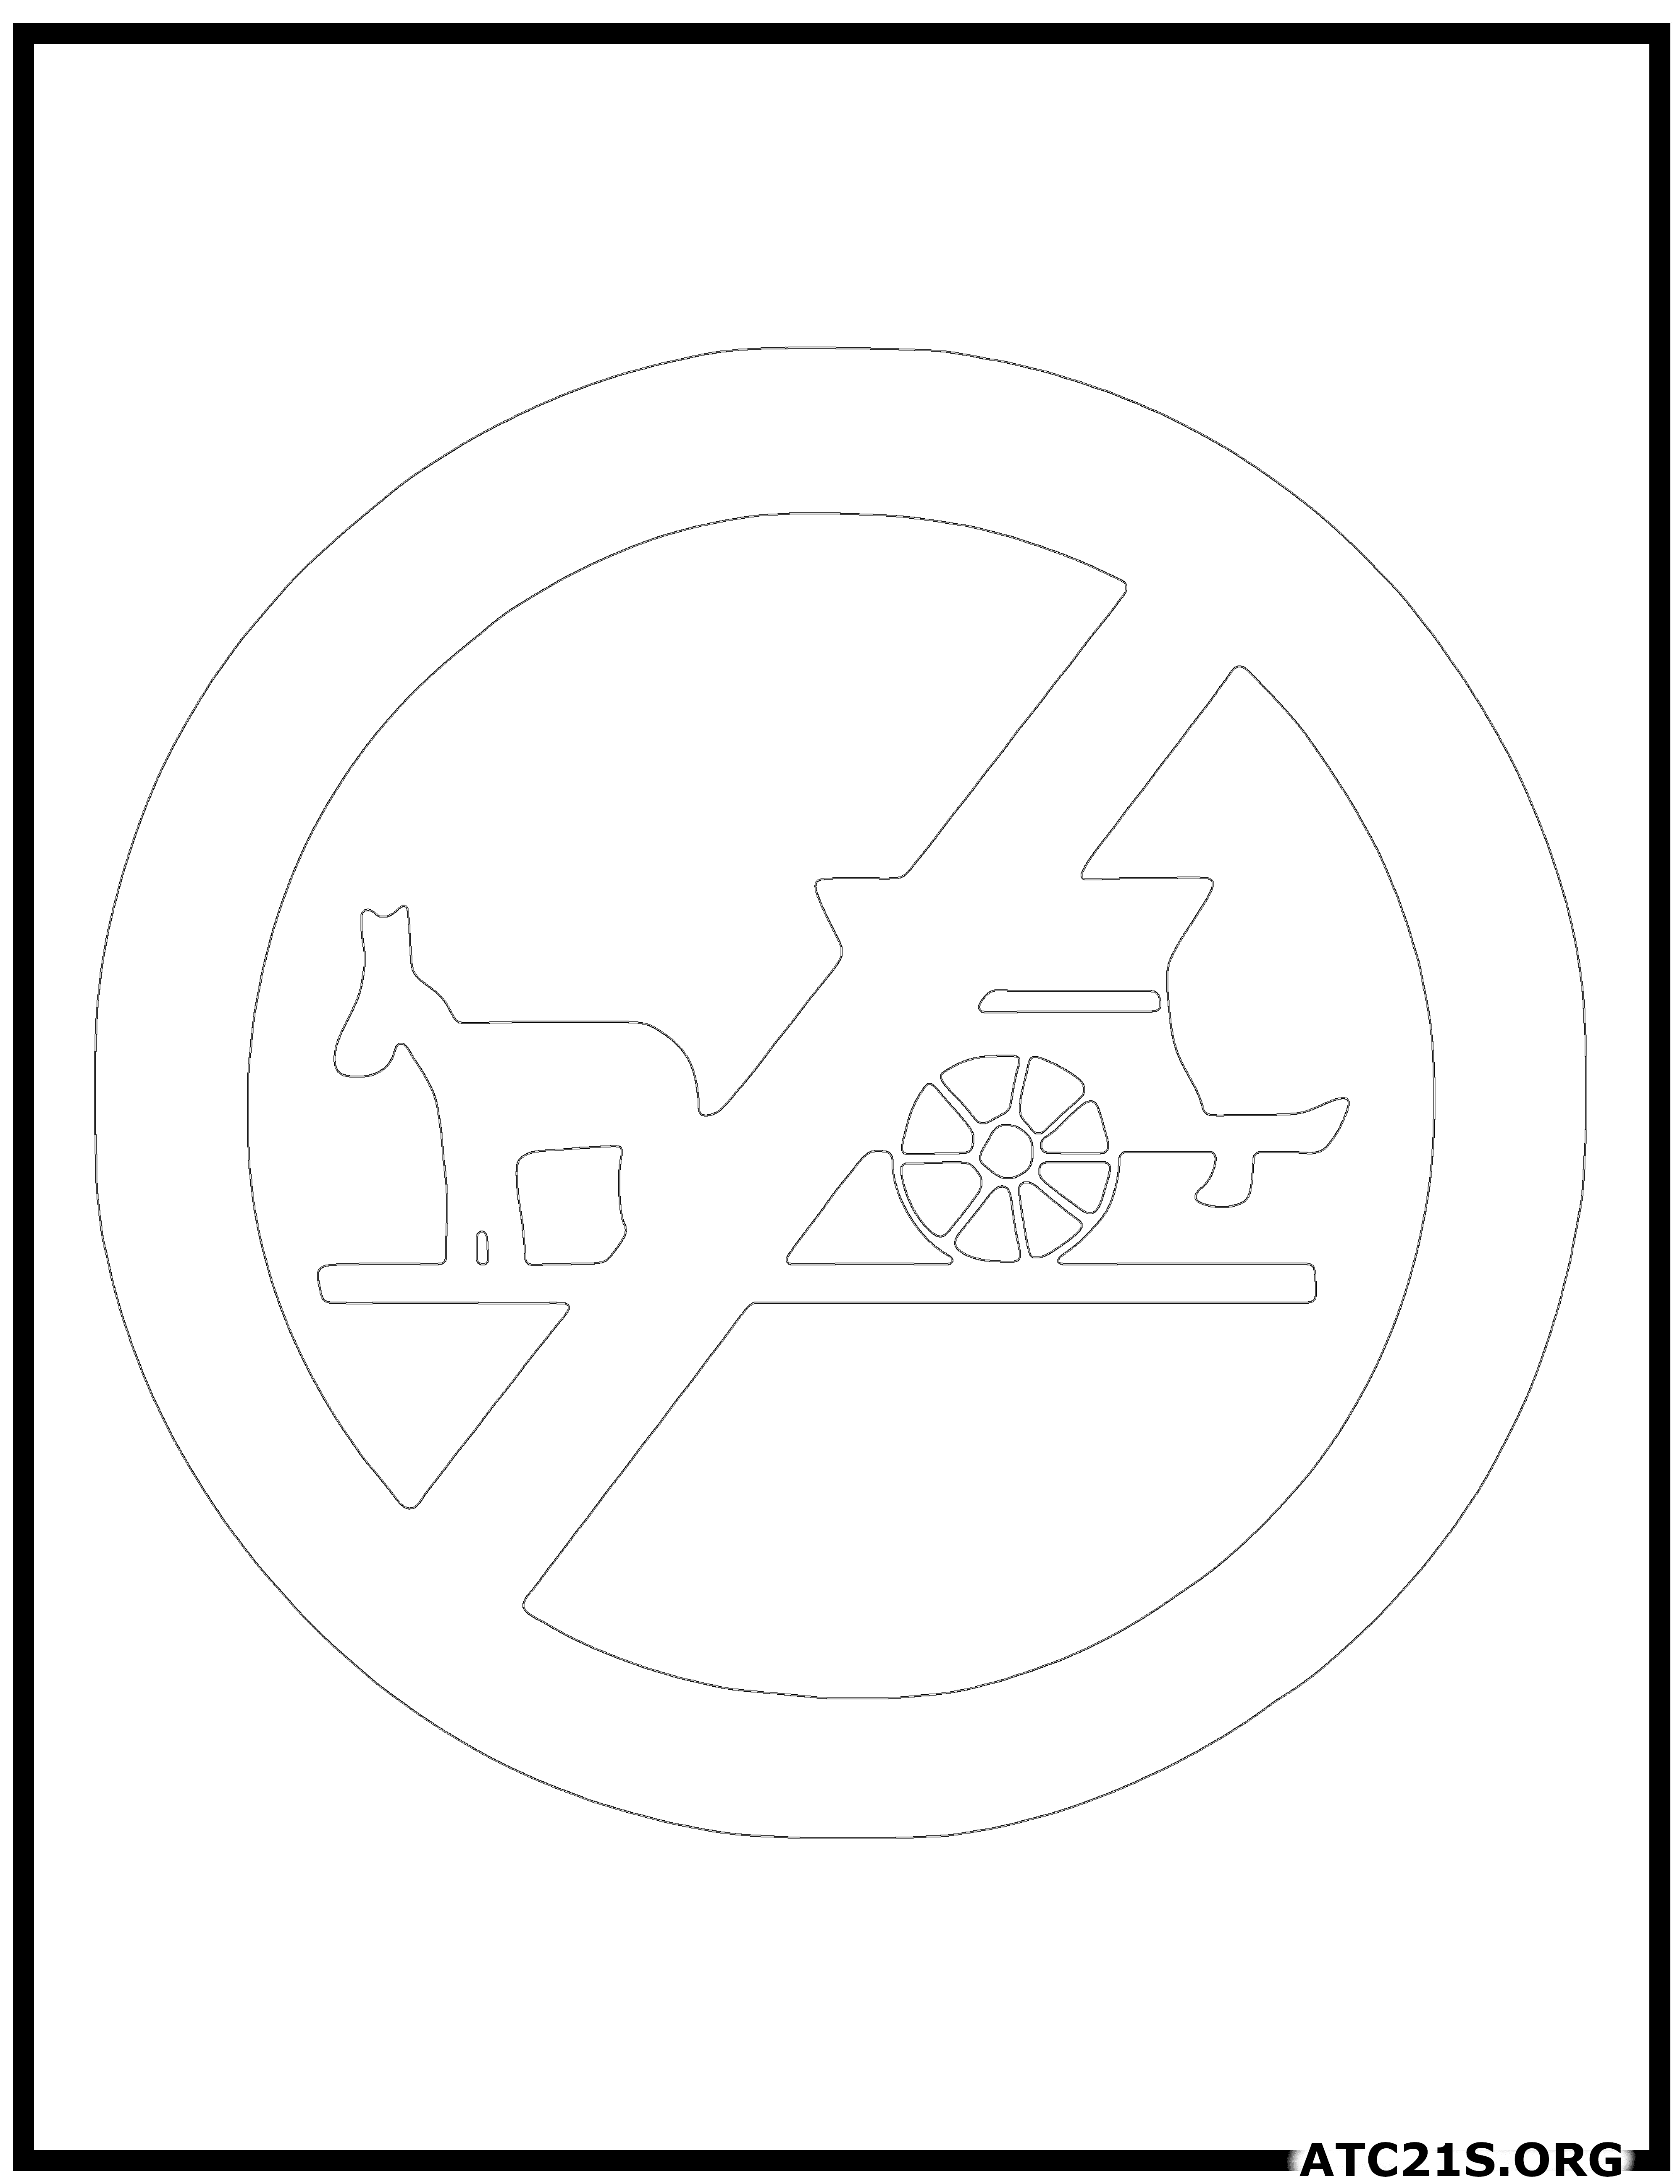 Tonga-prohibited-traffic-sign-coloring-page